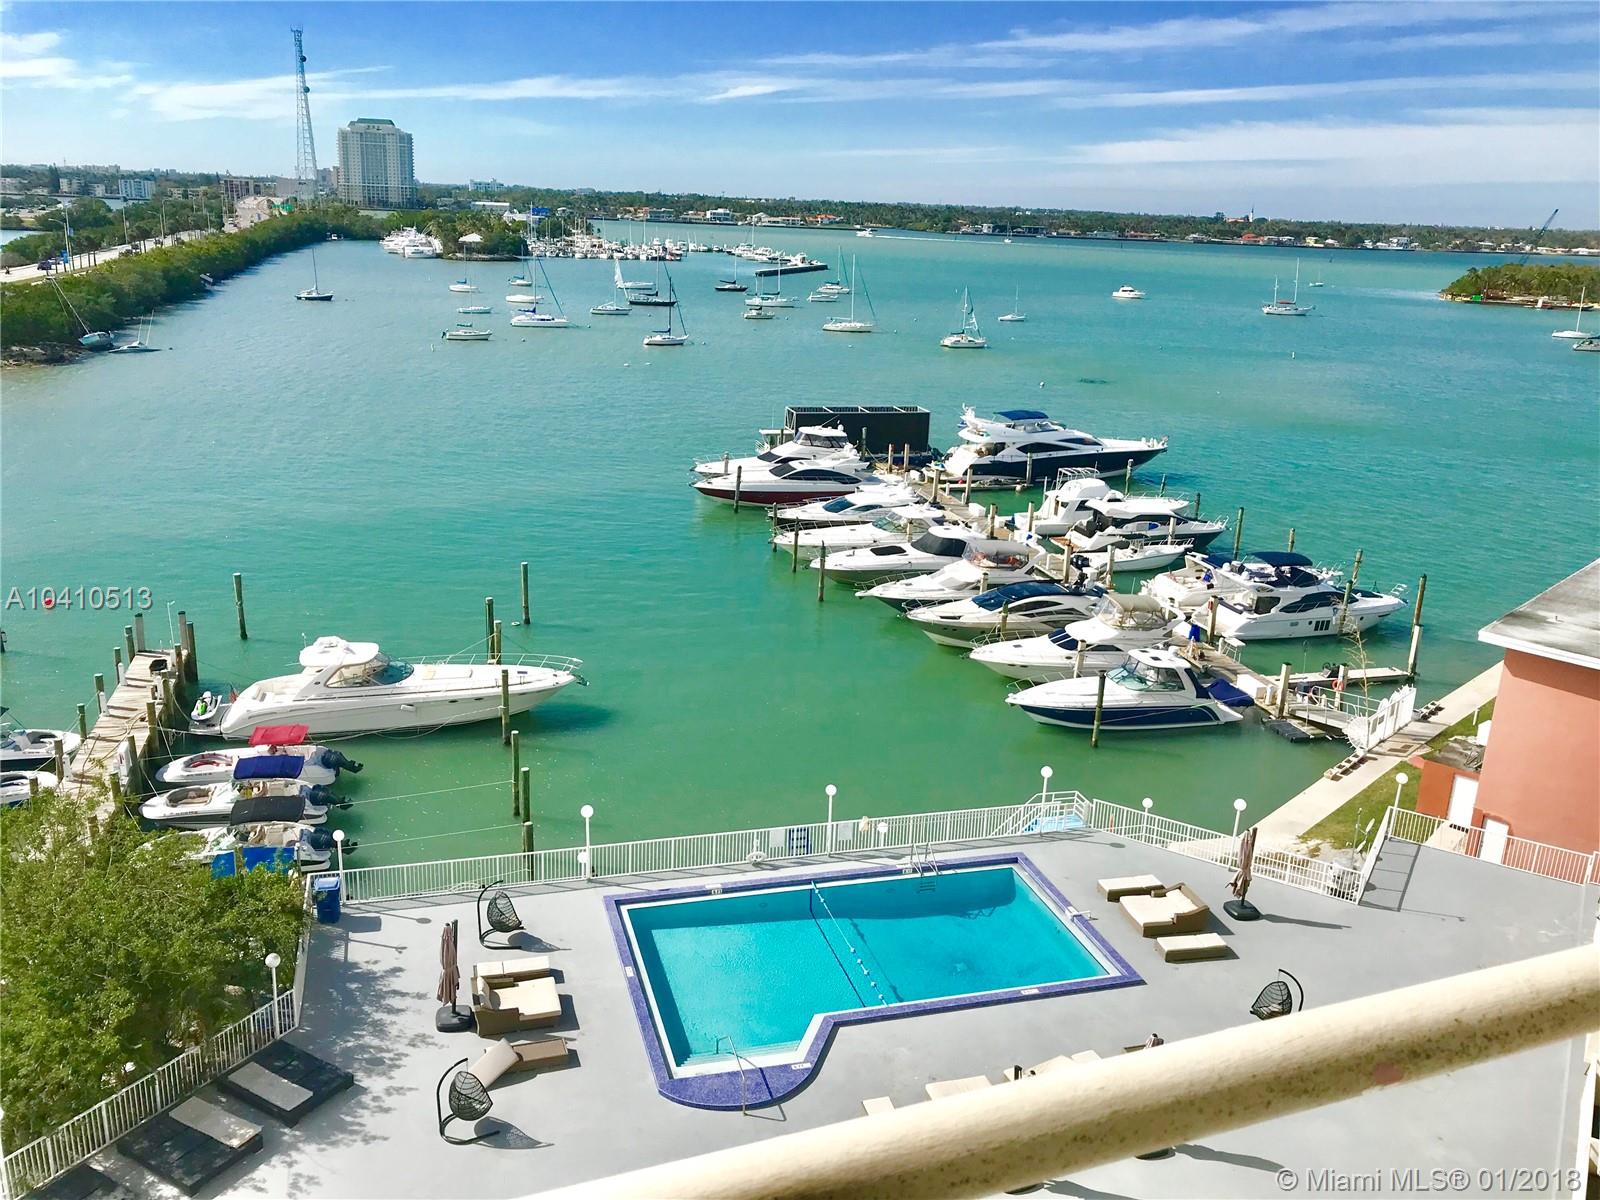 Wake up every morning to the most stunning Miami sunrises and enjoy picturesque sunsets every night from this cozy Bay front 1-bedroom/1-bath apartment overlooking the pool, tennis court and marina (direct access). Low maintenance fee, covenience store, pet grooming & boat rental facilities make this place ideal for both the owners and the renters. The building is located next to the restaurants, shops, beaches and within 15-minutes drive to Miami International Airport, Bal Harbor shops, Downtown Miami, South Beach, etc. No rental restrictions!!! Best priced unit in the building! It won&rsquo;t last long! The building is currently undergoing full renovation.